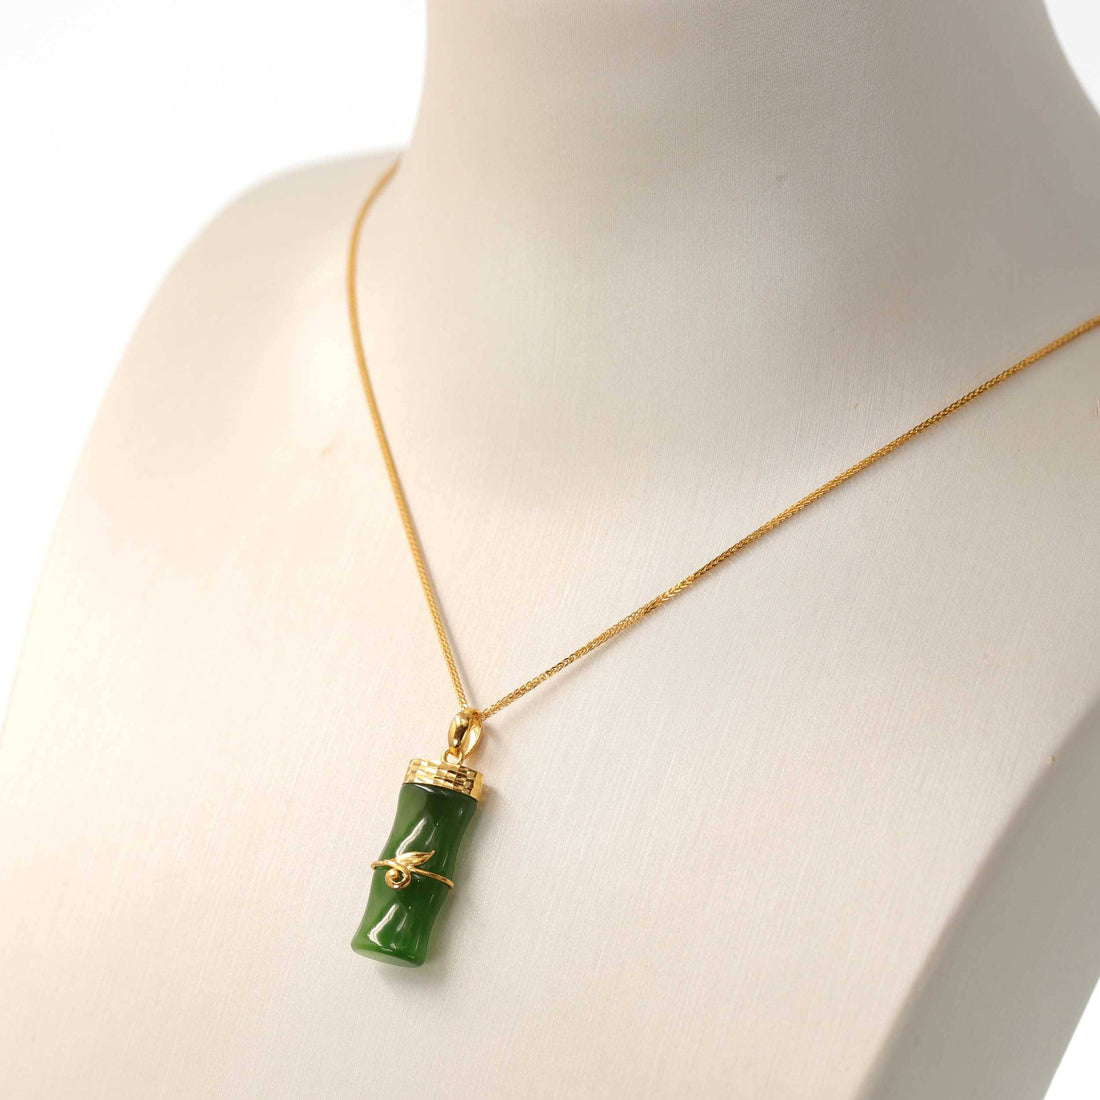 Baikalla Jewelry Gold Jade Necklace With 18K Solid Yellow Gold Chain 24k Yellow Gold Genuine Nephrite Green Jade Bamboo Pendant Necklace